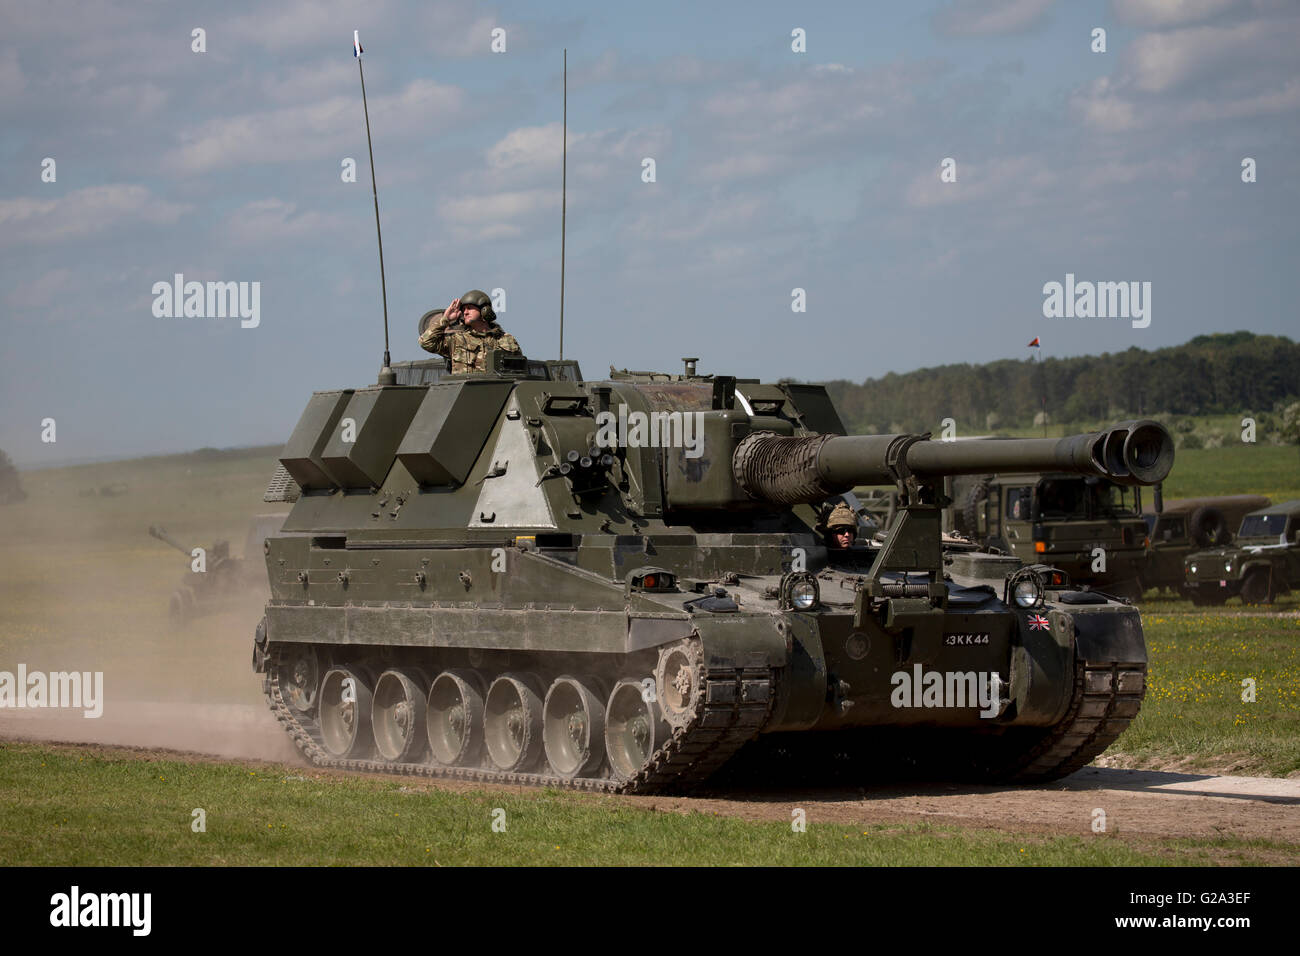 British Army AS90 self propelled gun of the Royal Artillery Regiment in action on Salisbury Plain in Wiltshire, UK Stock Photo